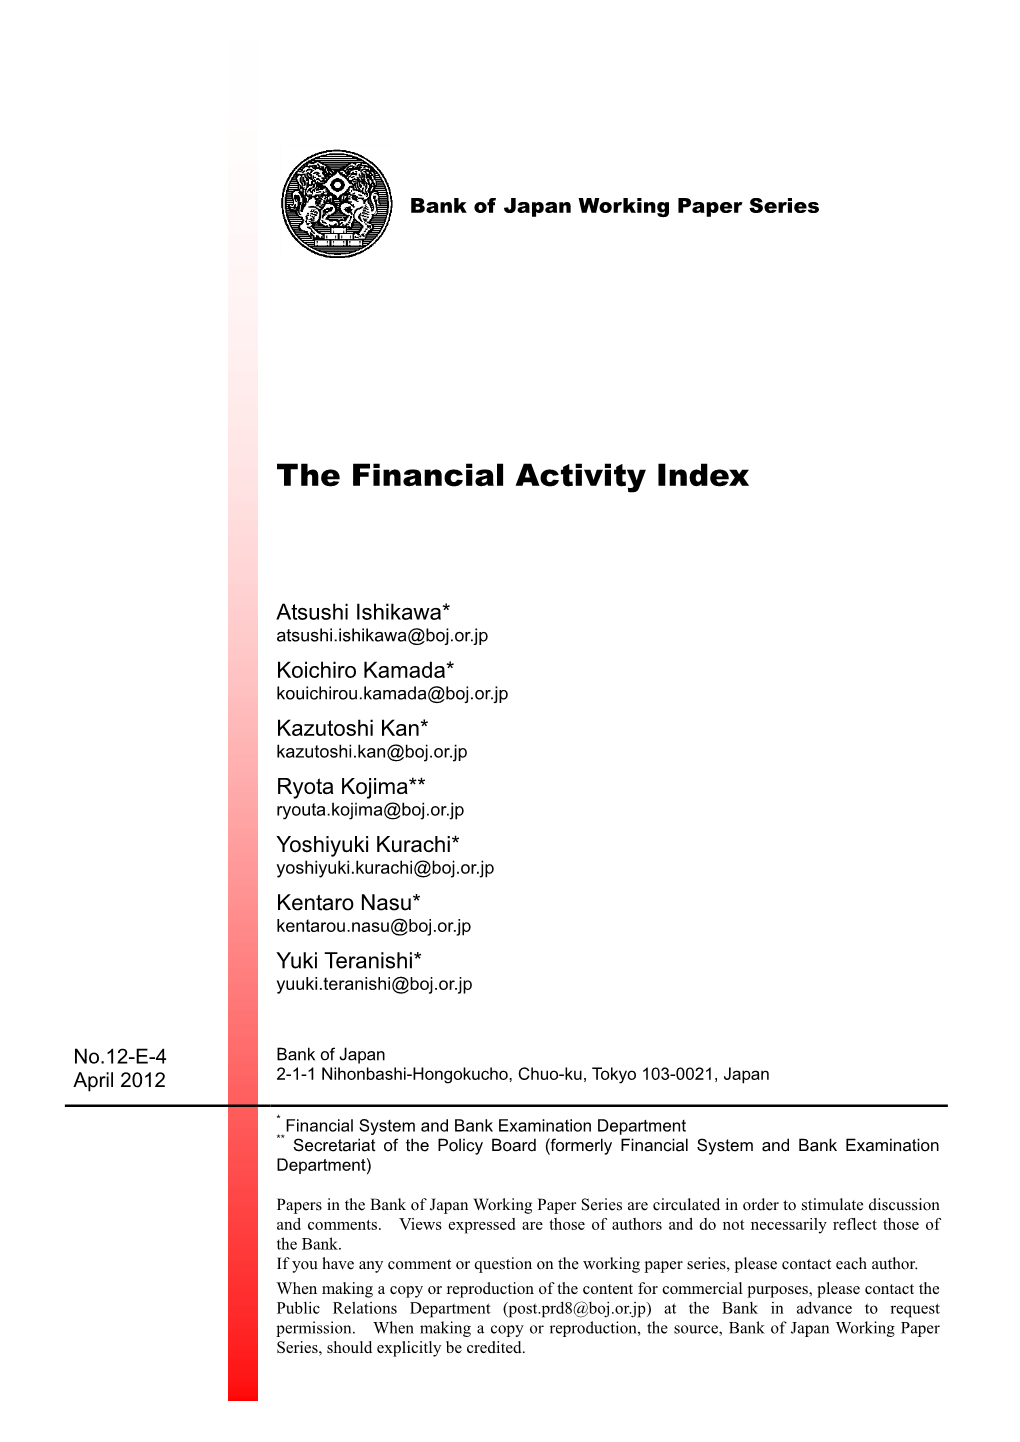 The Financial Activity Index